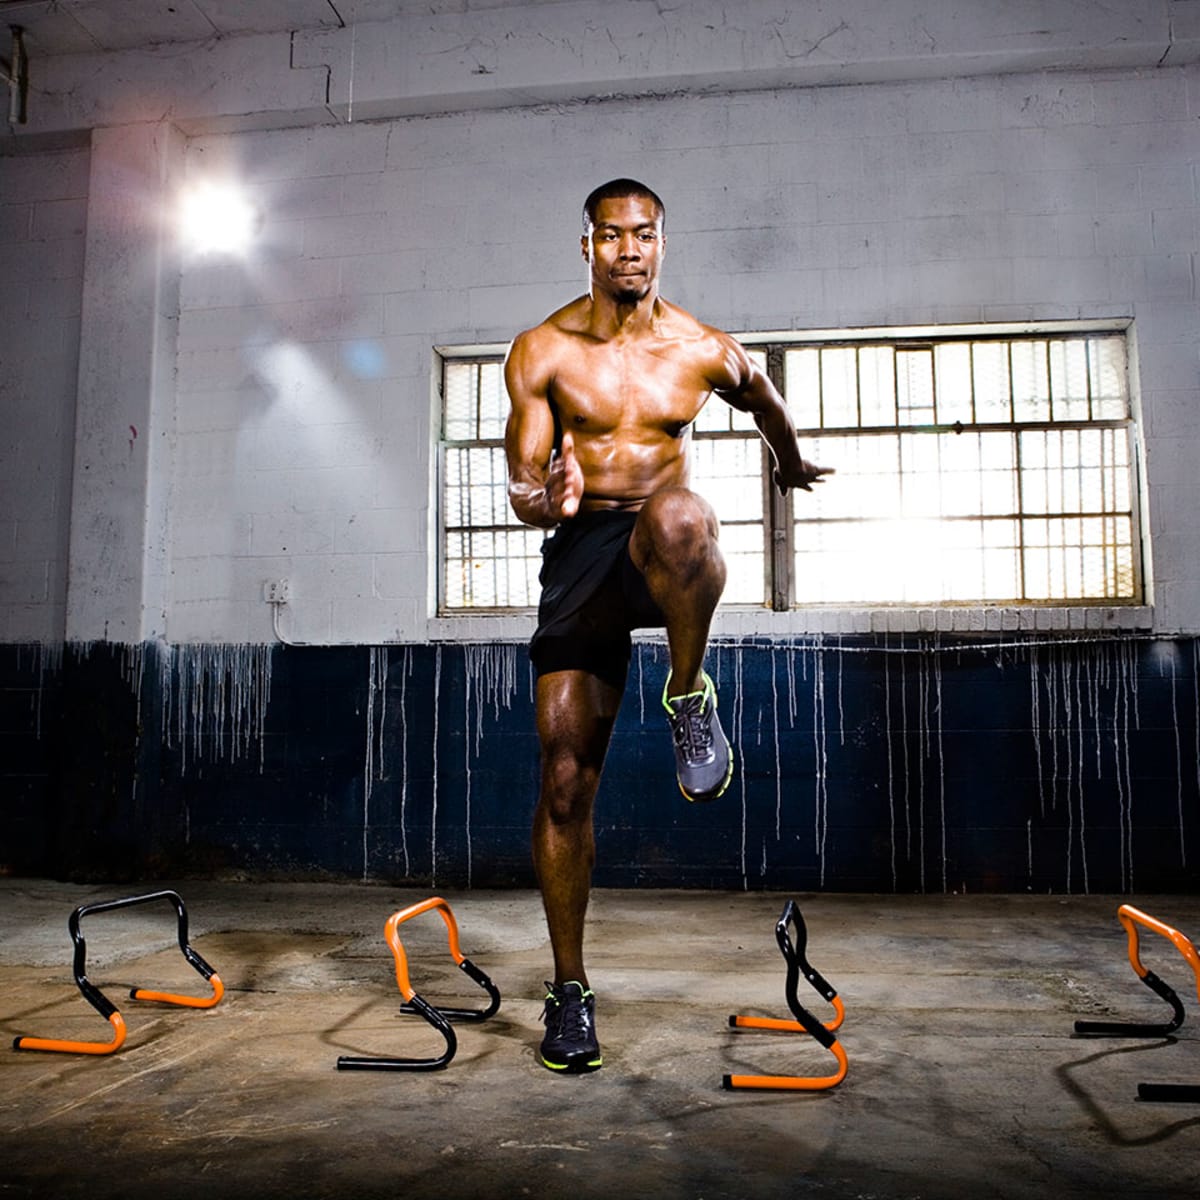 Agility-training Exercises That Will Make You Better at Any Sport